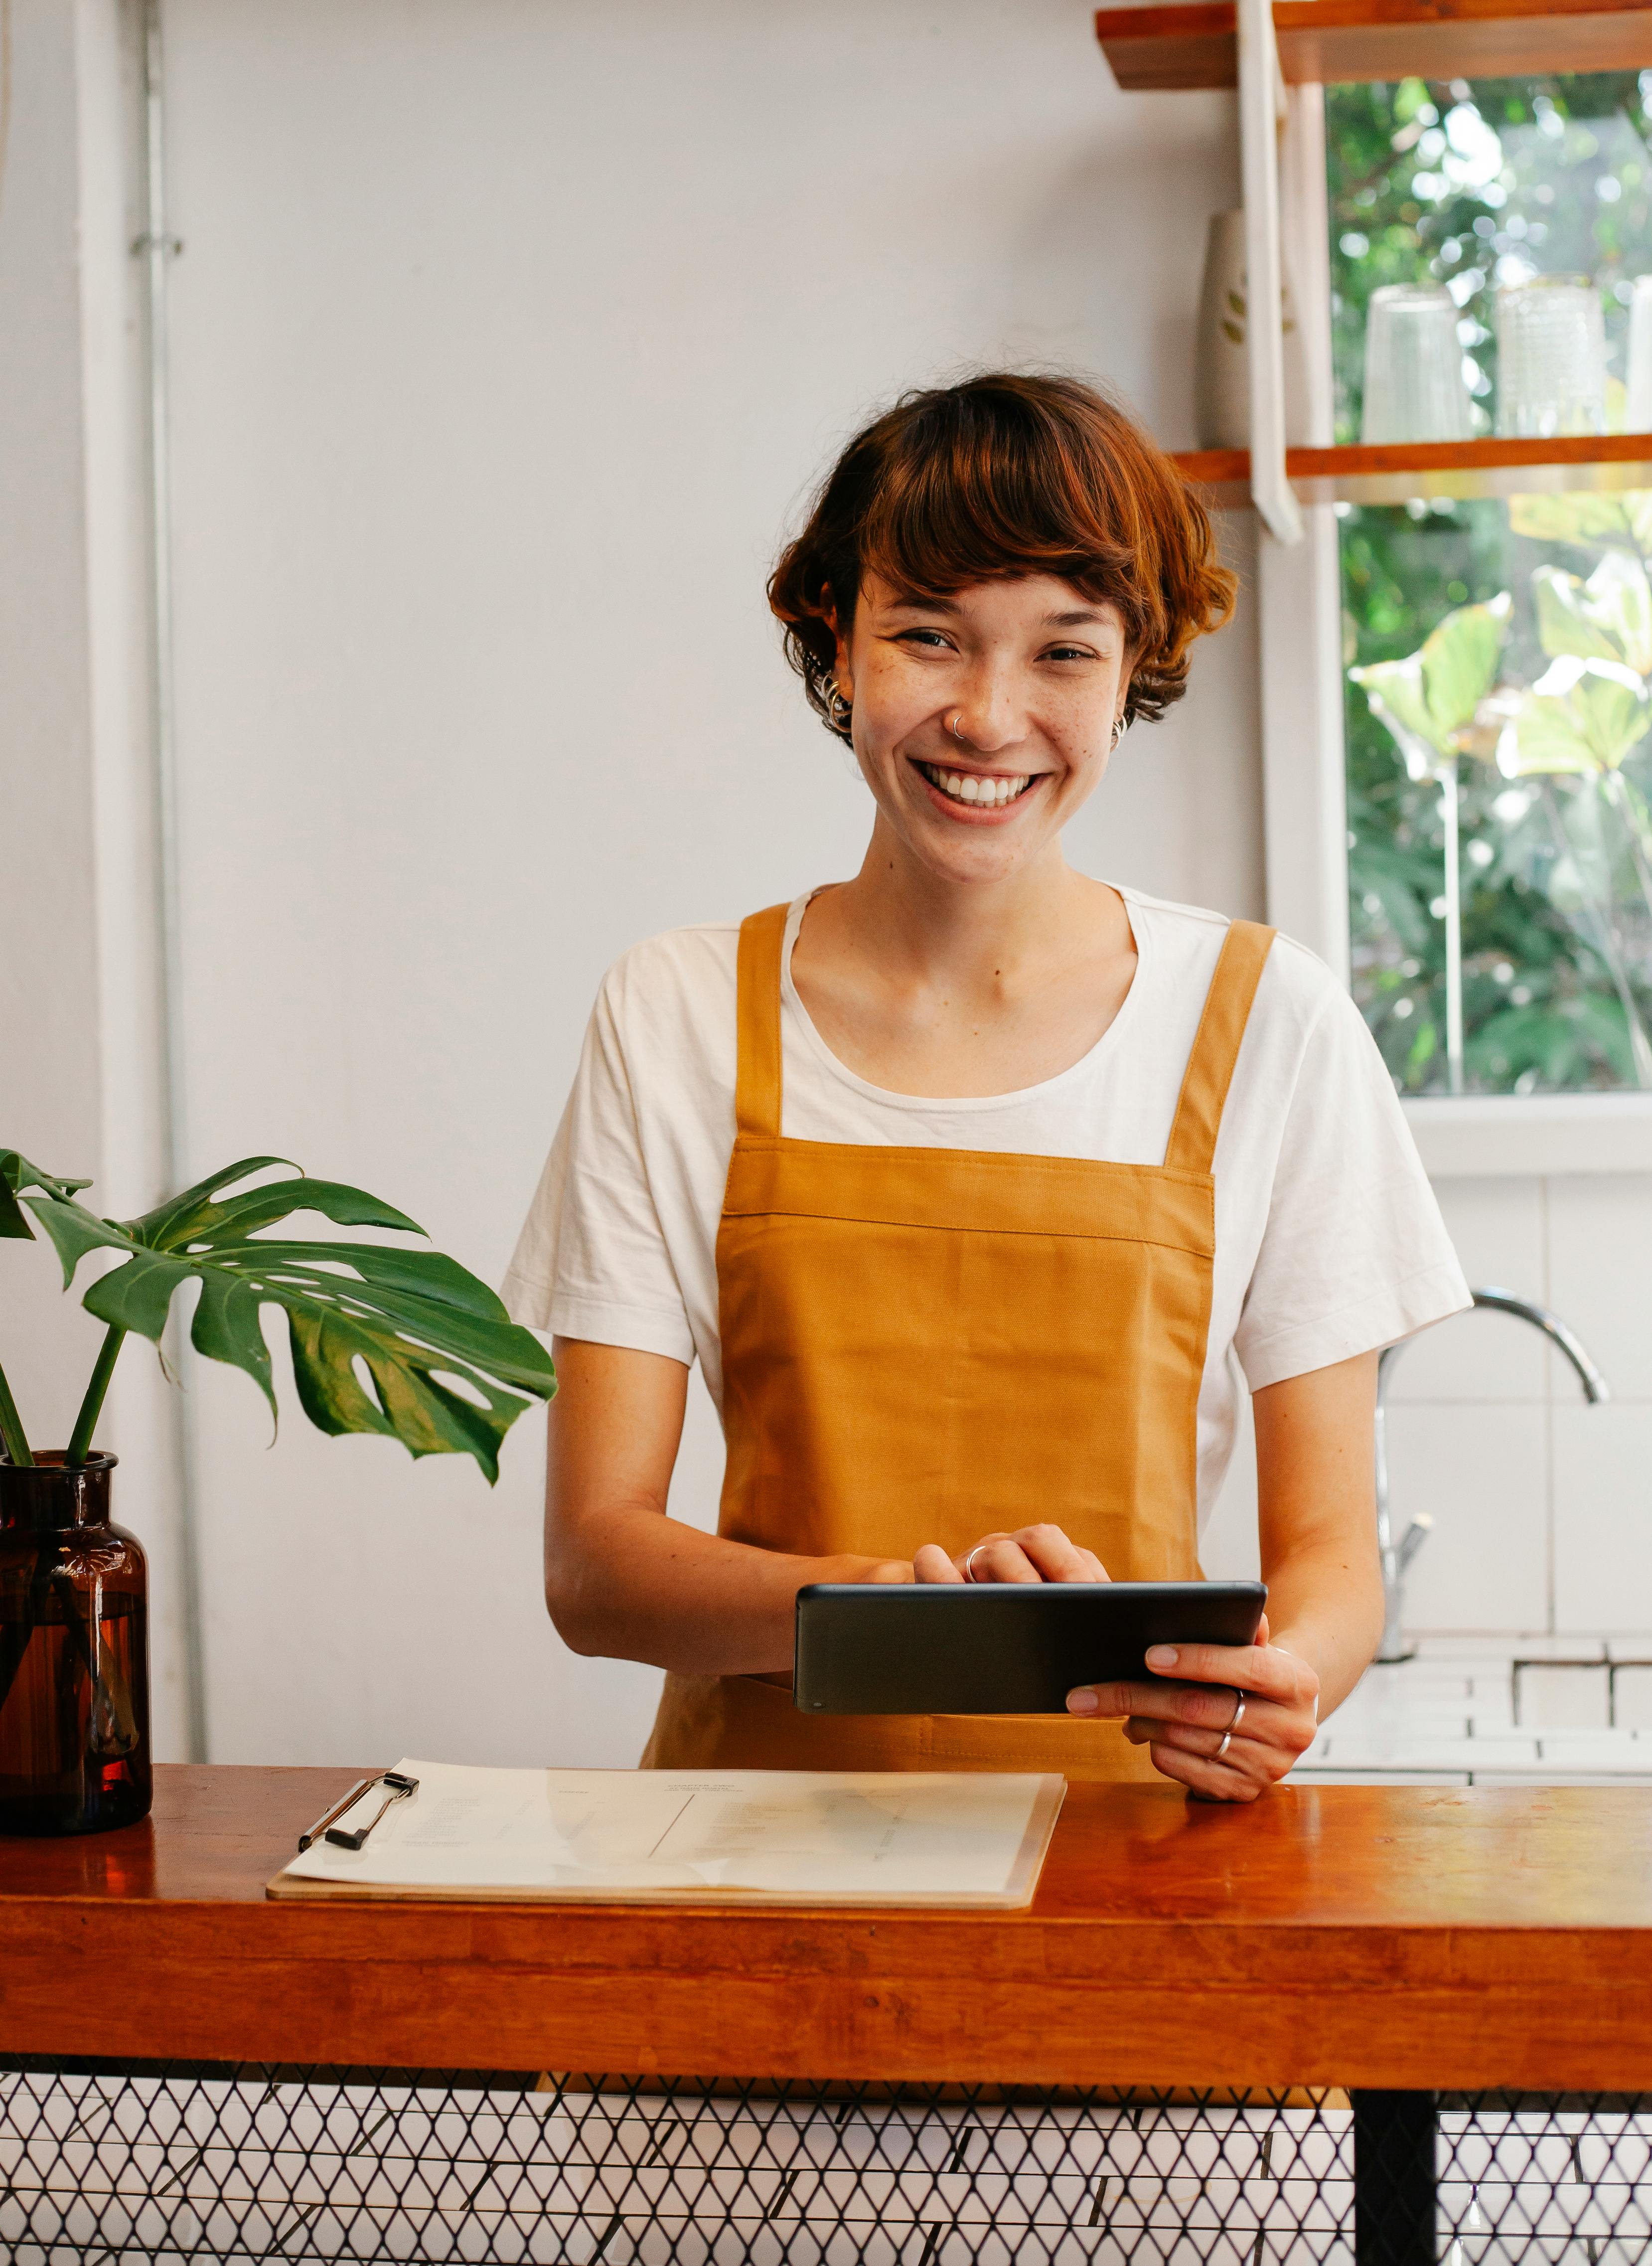 cheerful employee with tablet at cafe counter